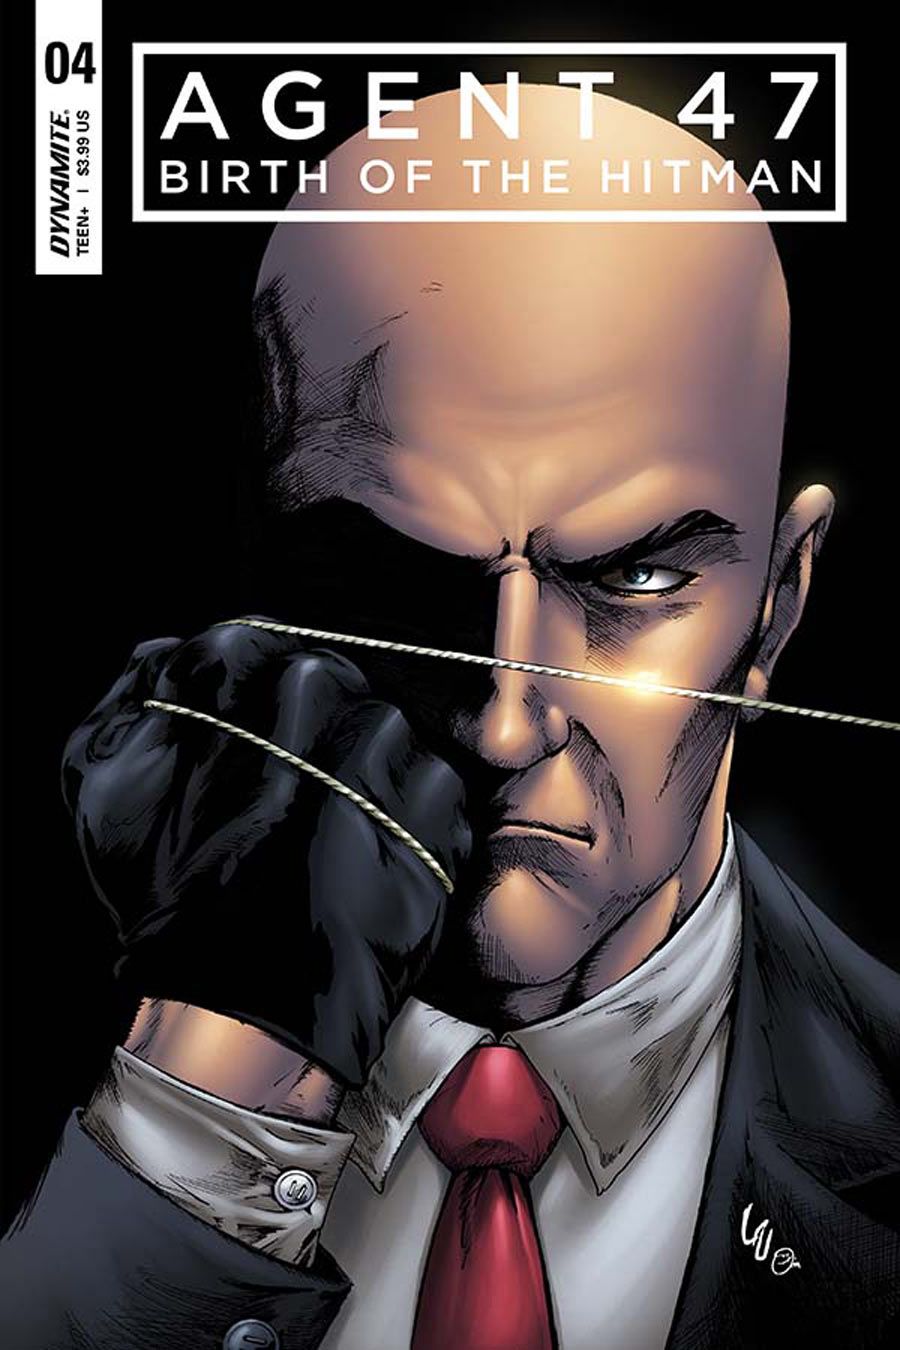 PREVIEW Agent 47 Birth of the Hitman 4